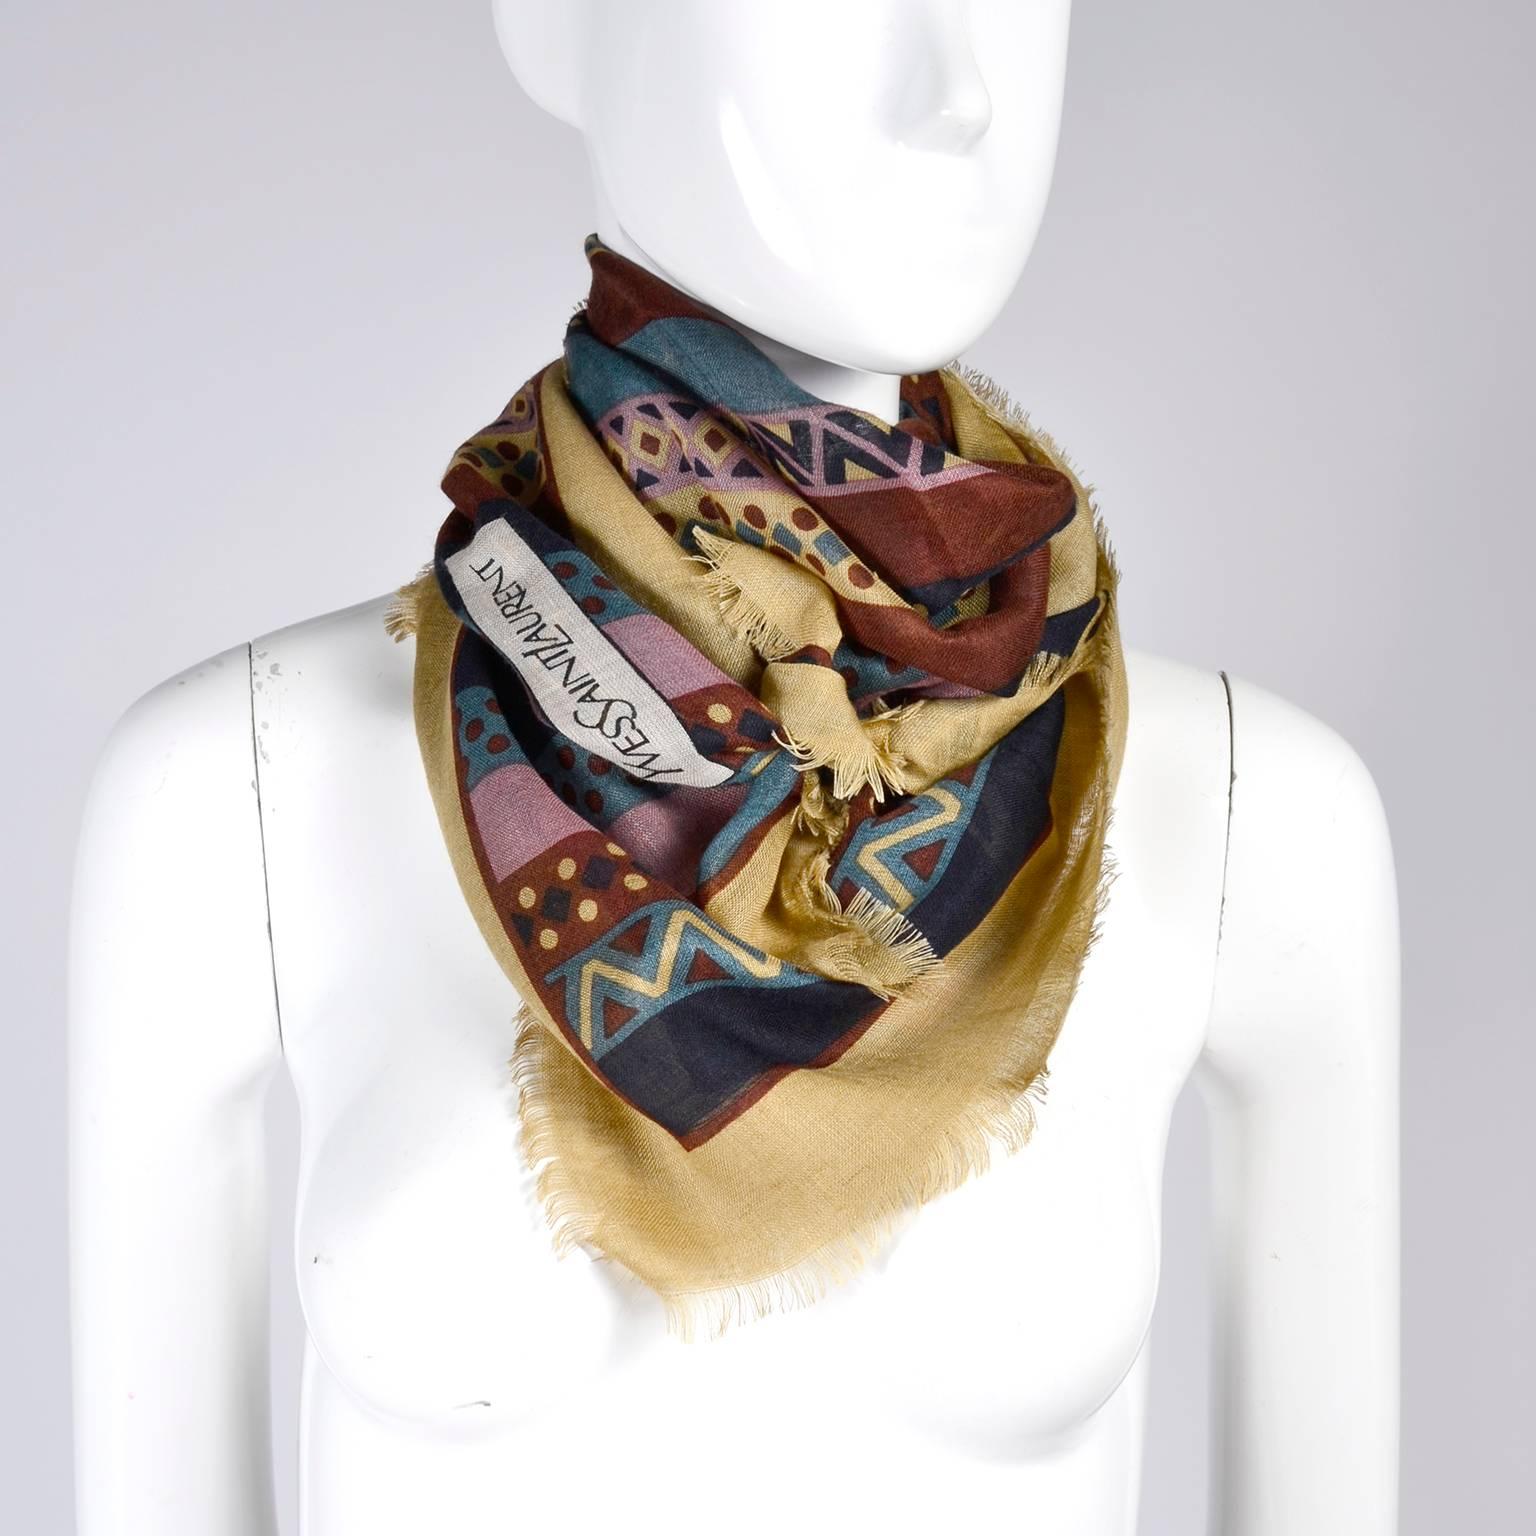 This is a wonderful very fine wool 34" SQUARE vintage Yves Saint Laurent scarf with great geometric patterns and 1/4" fringed edges. The colors are a beautiful palette of rich burgundy, wheat, blues and purples.  This YSL scarf can be worn